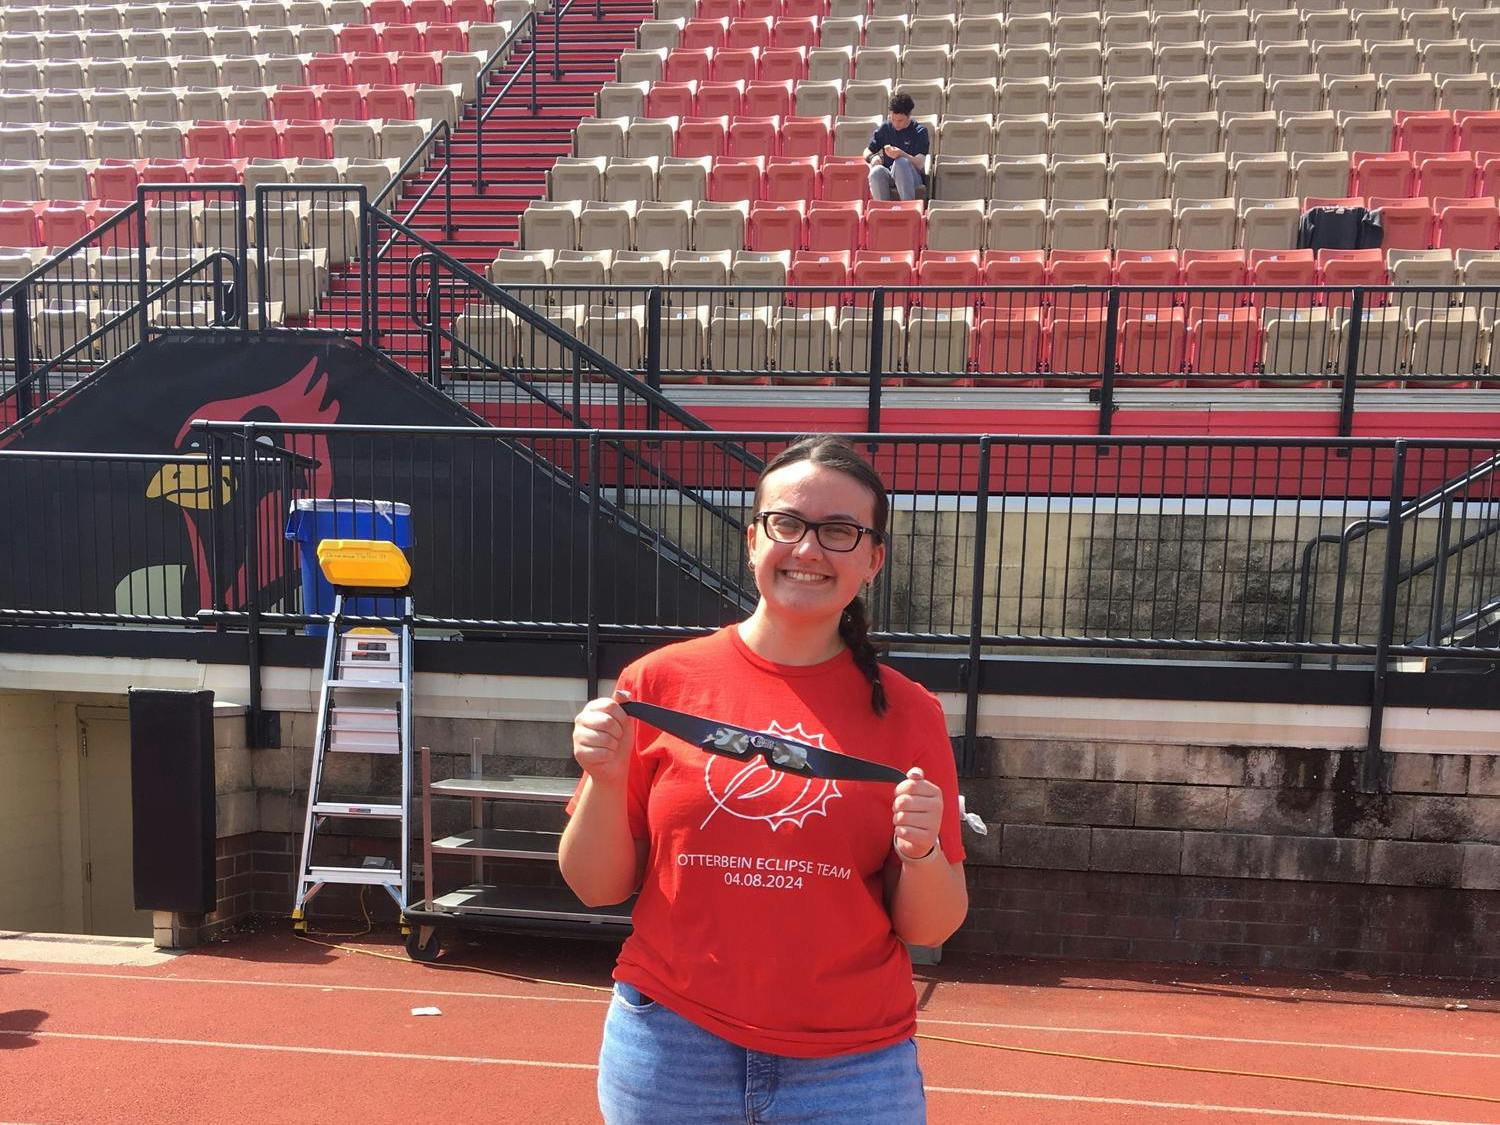 Girl in a red shirt that reads 'OTTERBEIN ECLIPSE TEAM 04.08.2024' in white lettering. She is smiling and holding up a pair of solar eclipse sunglasses.